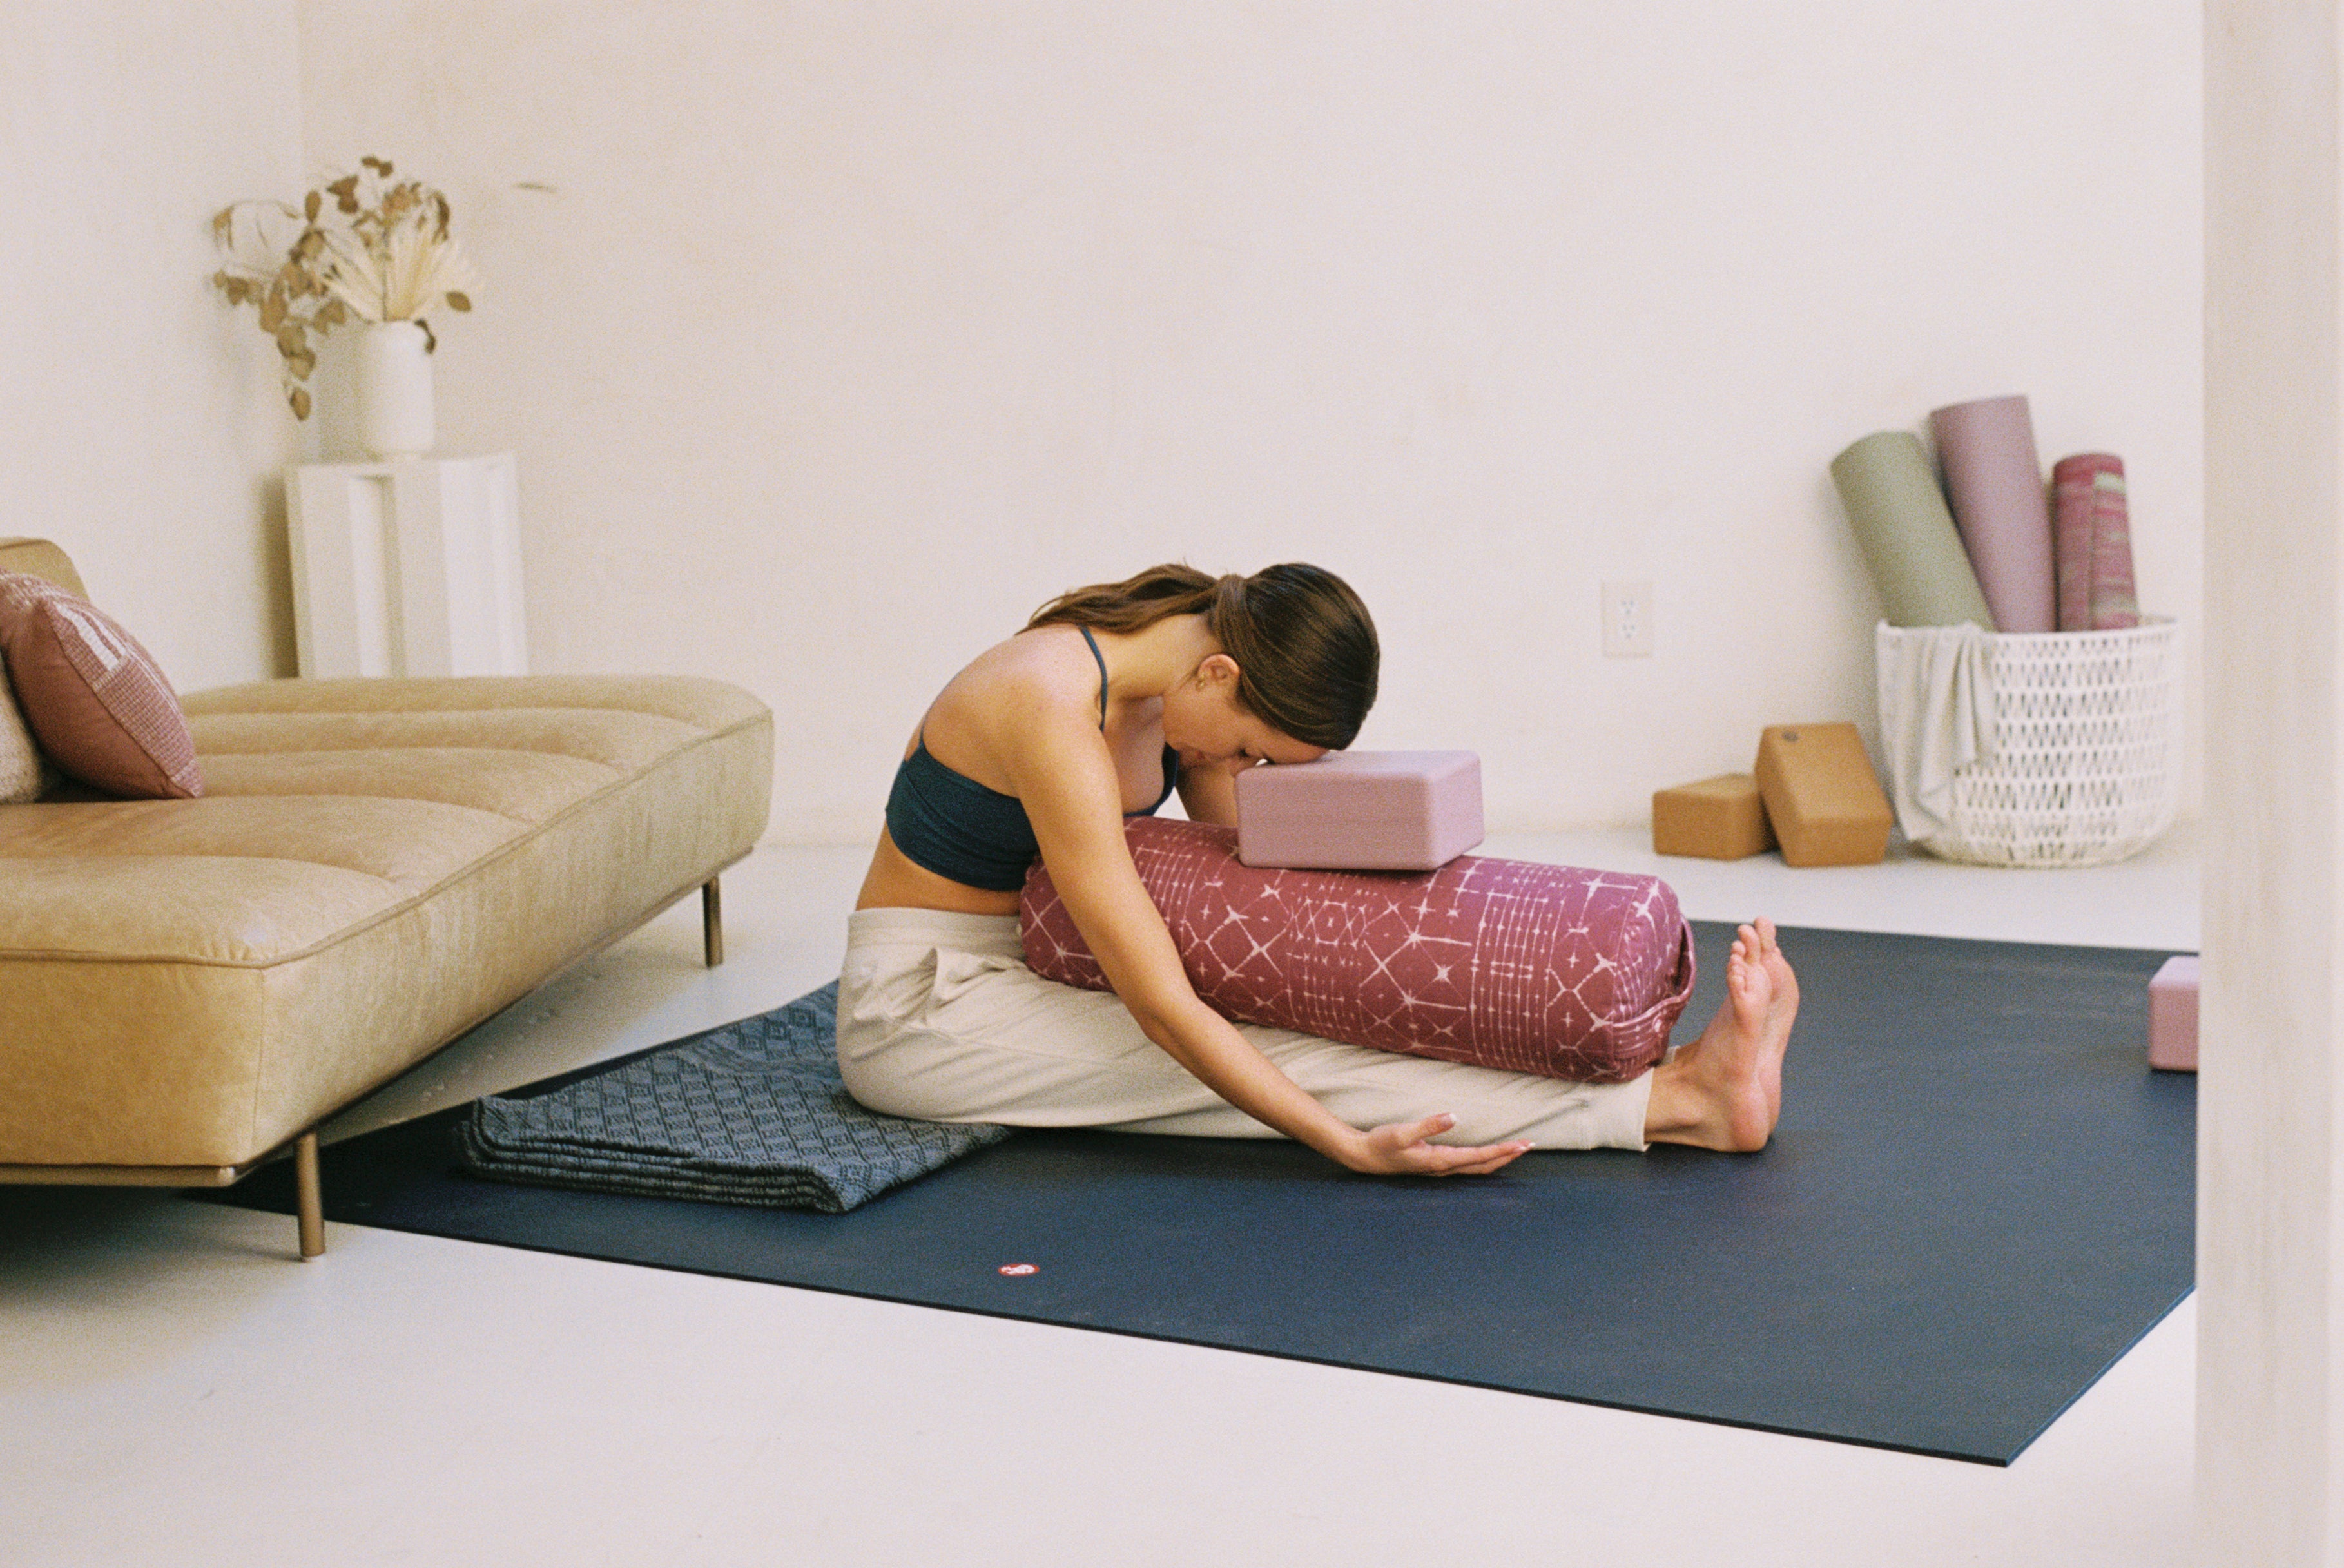 Rectangular, Lean or Round - Which yoga bolster is right for you? – Manduka